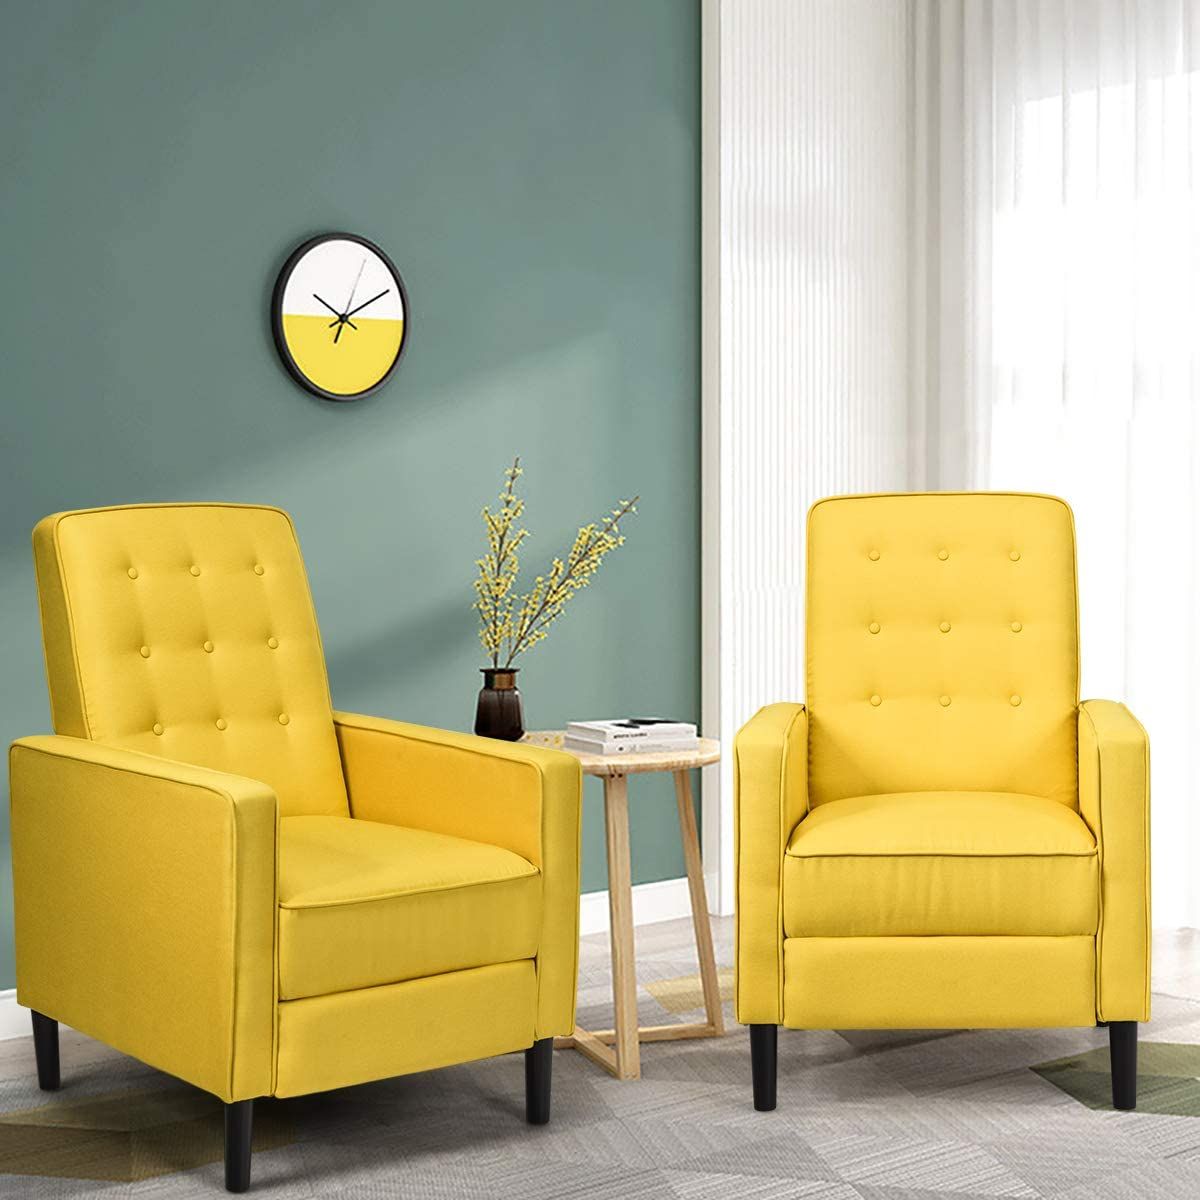 3-Position Adjustable Sofa Chair Leisure Seat with Extendable Footrest - Yellow